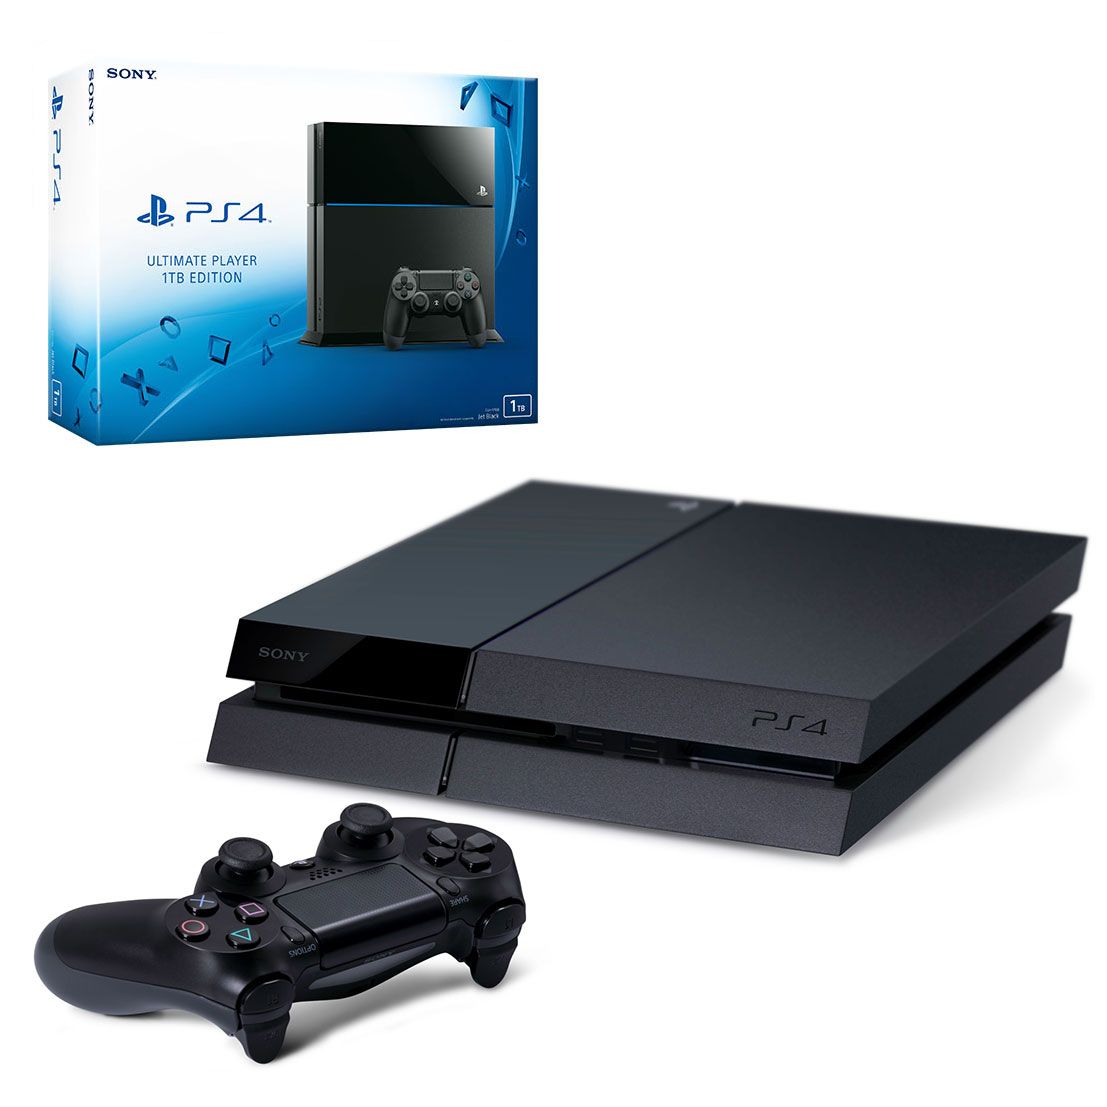 Ps4 Ultimate Player 1tb. Ps4 Ultimate Edition 1tb. Стационарная приставка ps4. Sony PLAYSTATION 1000.